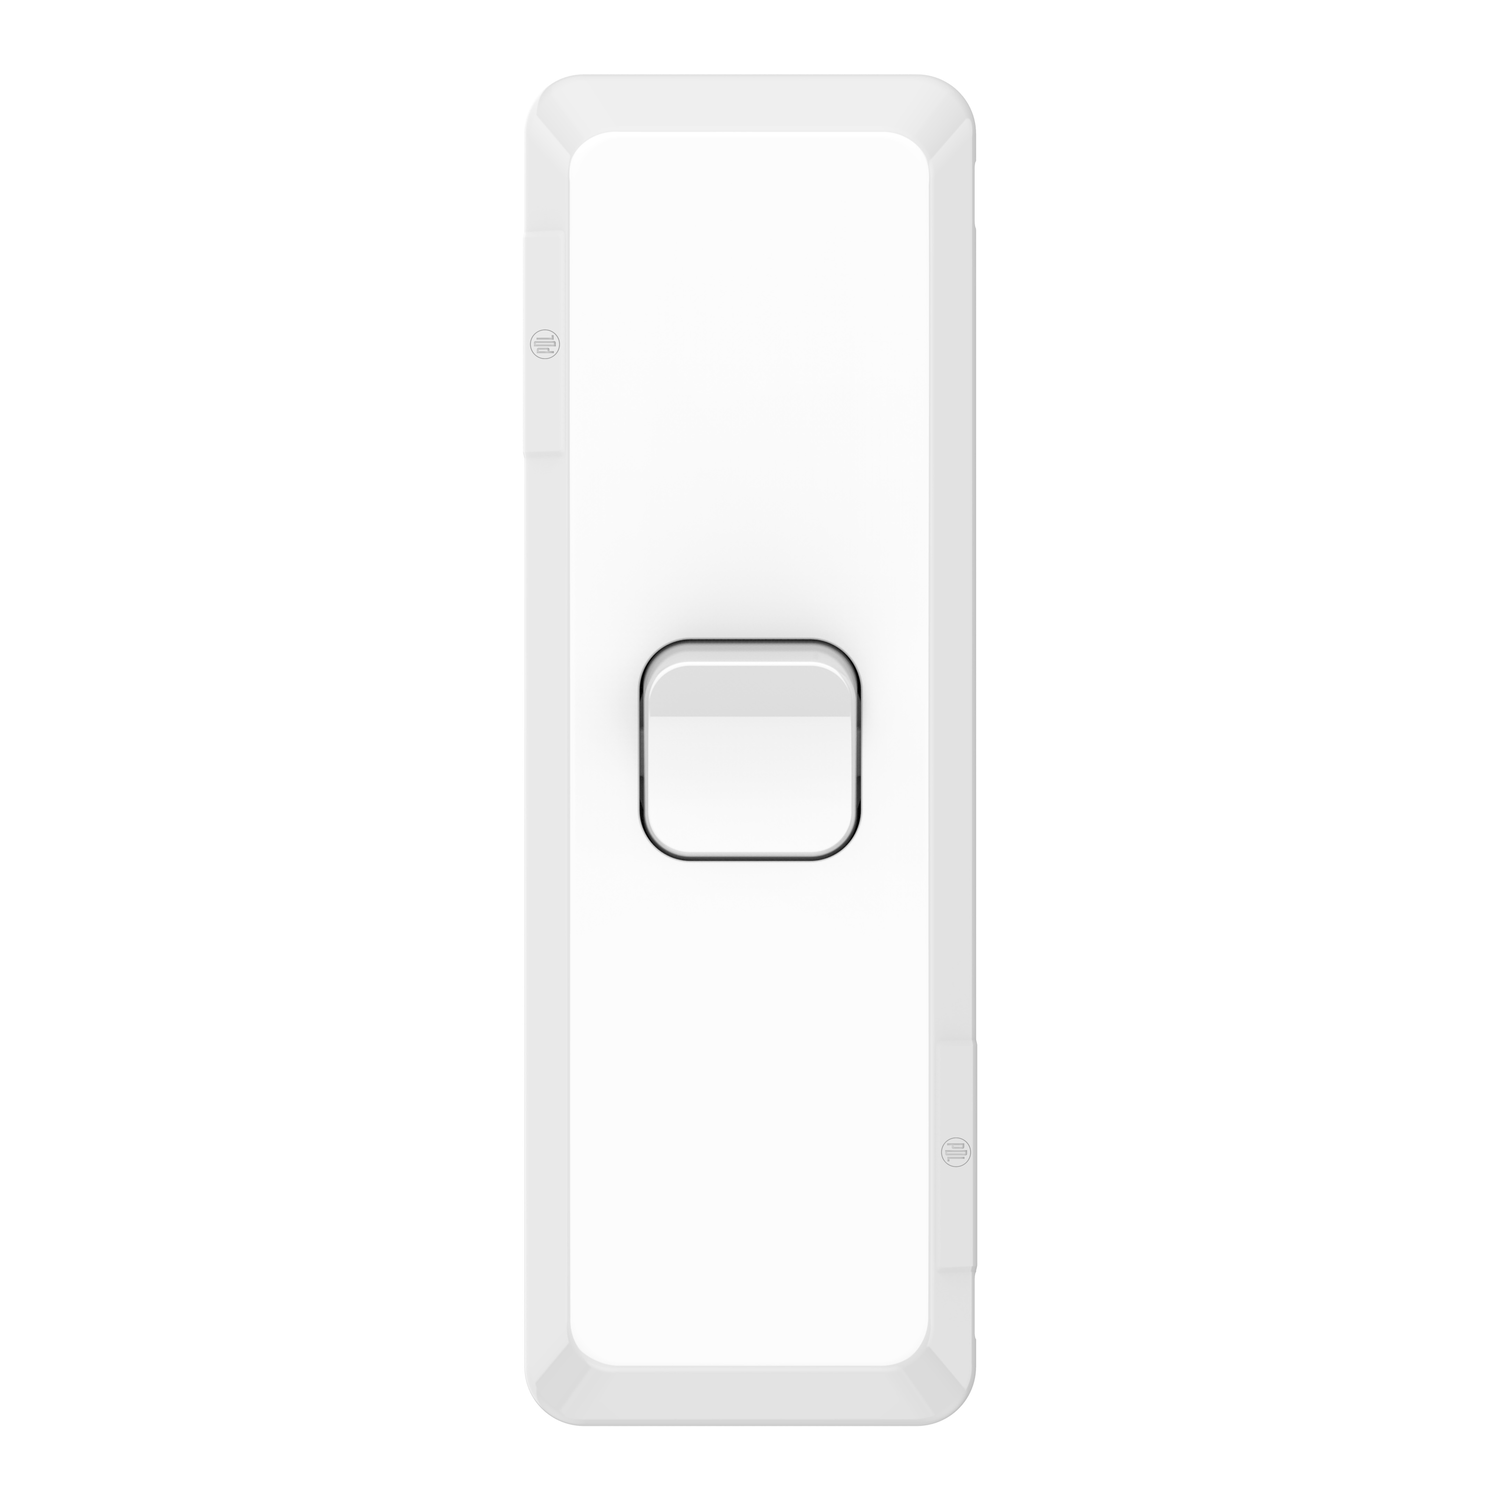 PDL Pro Series - Switch Architrave 1/2-Way 20A 16AX 1-Gang - White